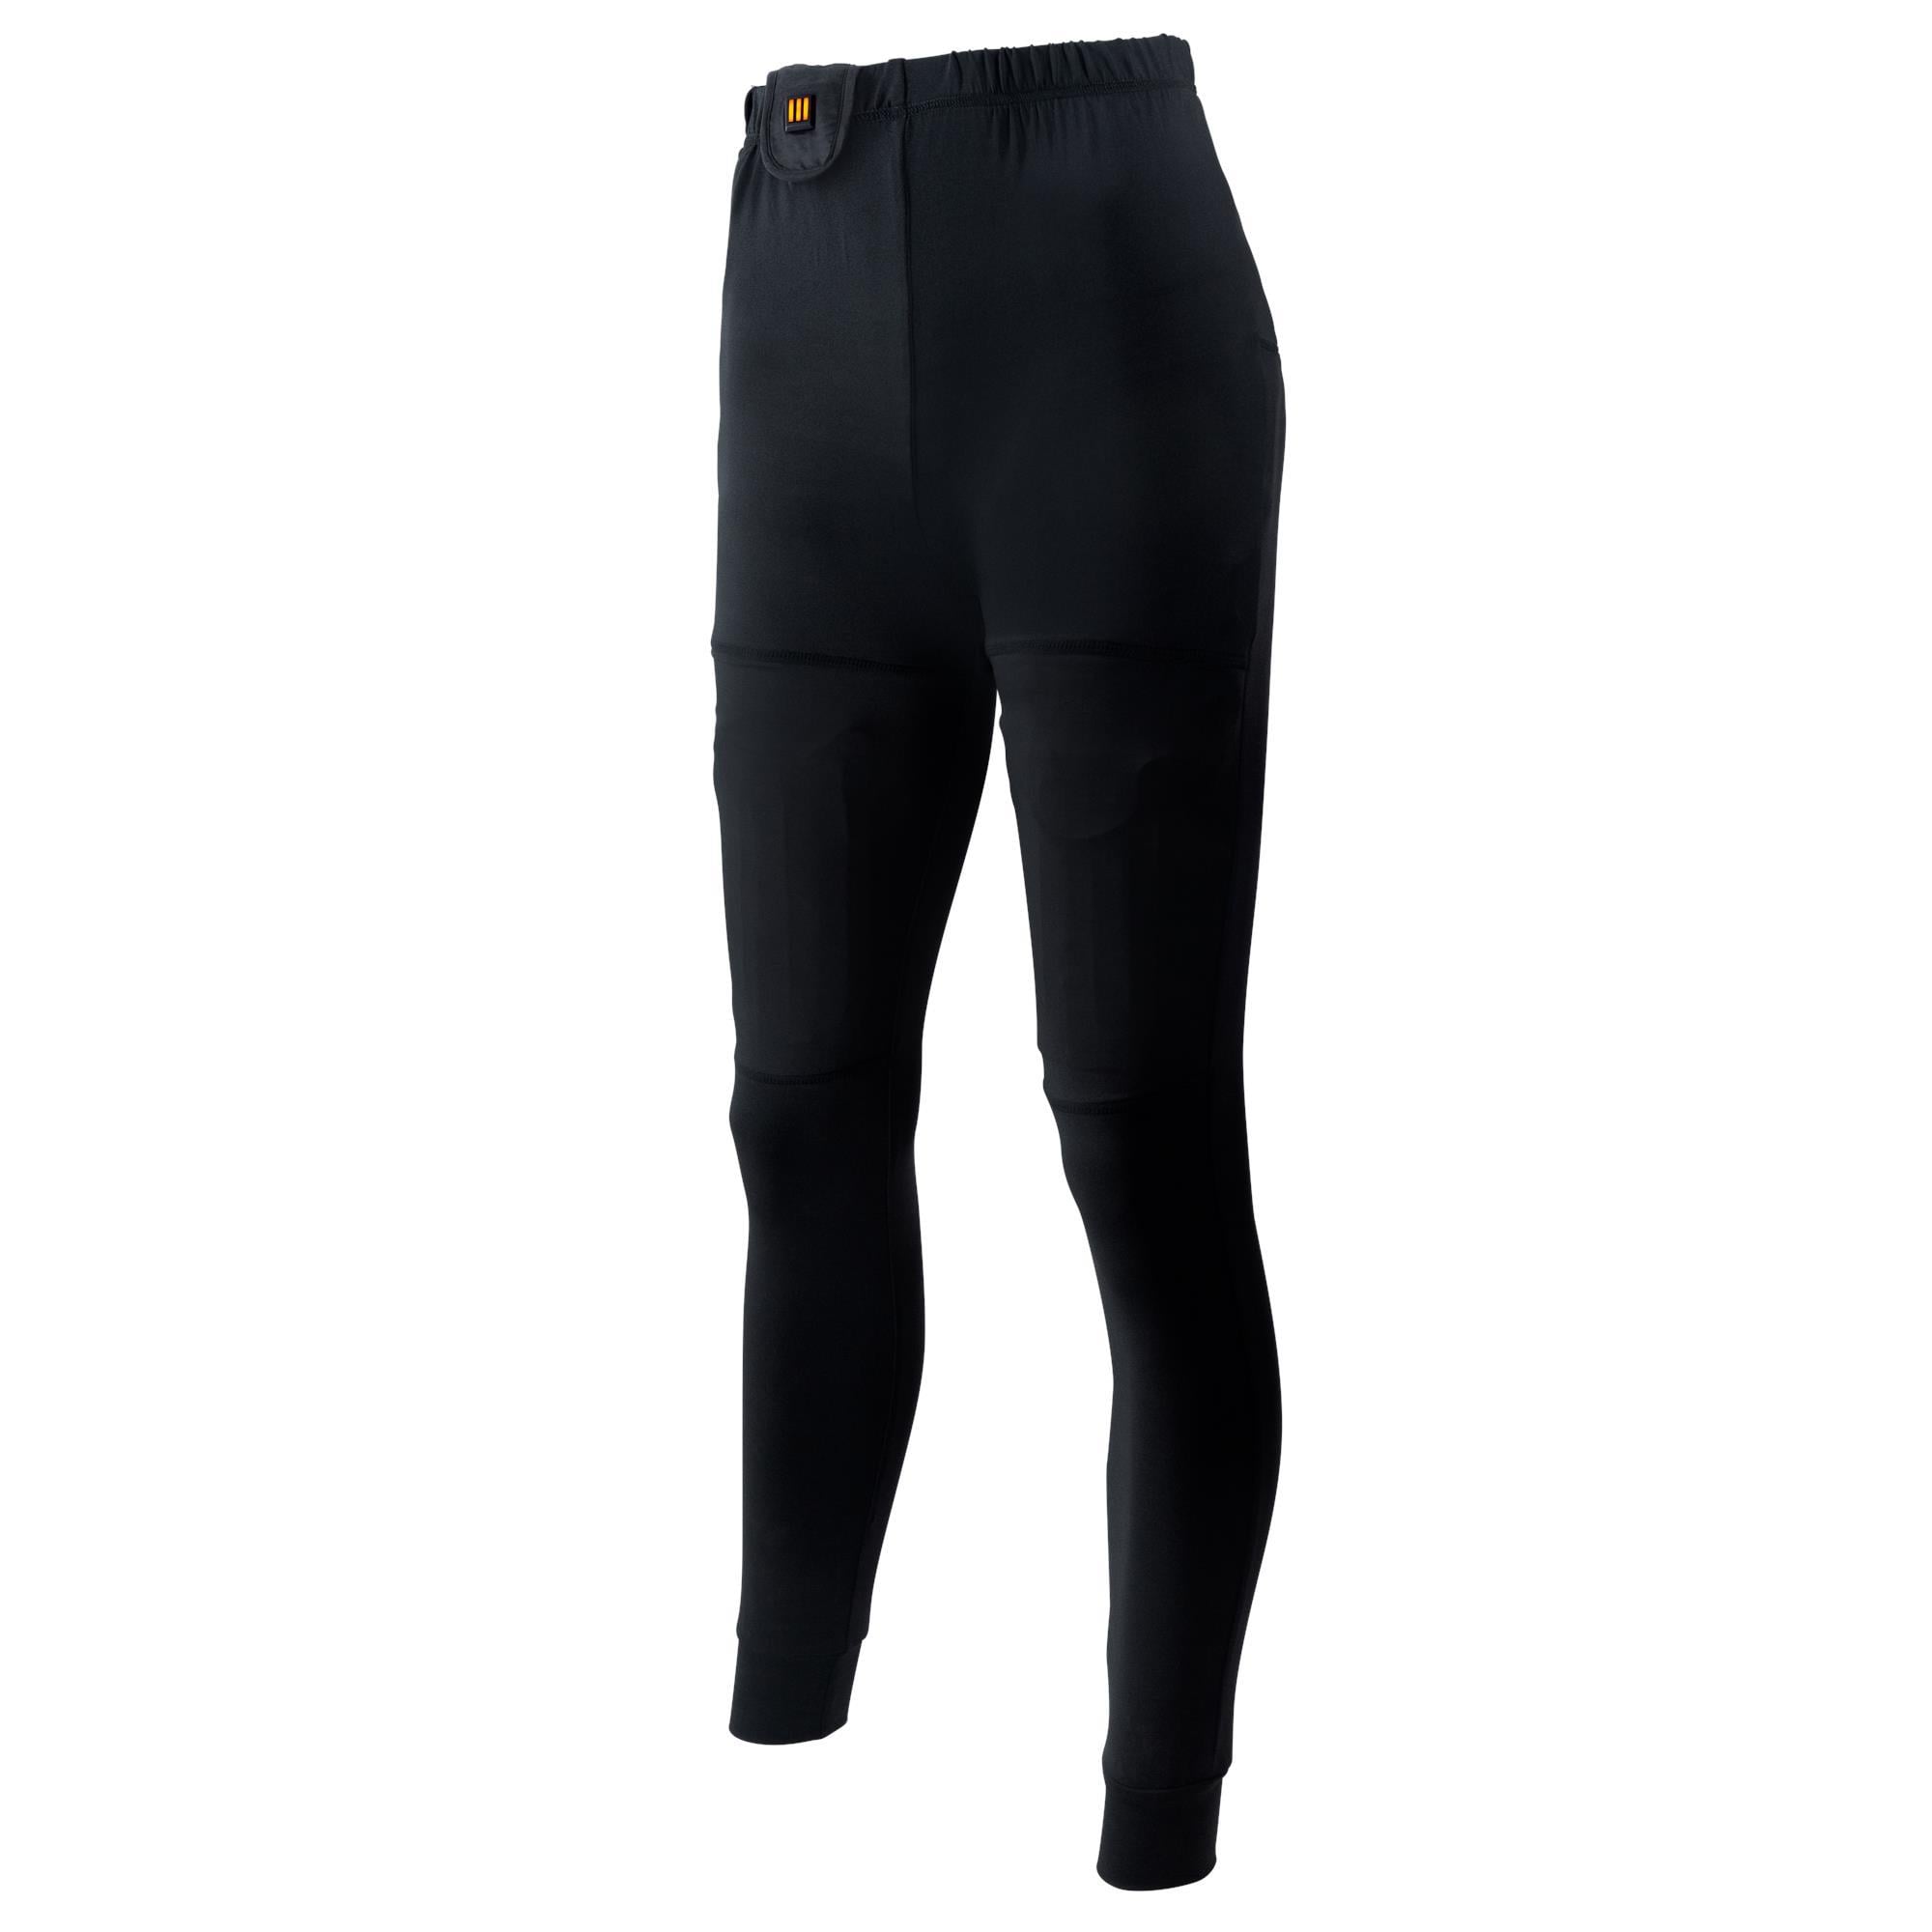 Gobi Heat Women's XL Heated Pants - Black, Wind and Water Resistant,  Flexible Polyester/Spandex Blend in the Pants department at